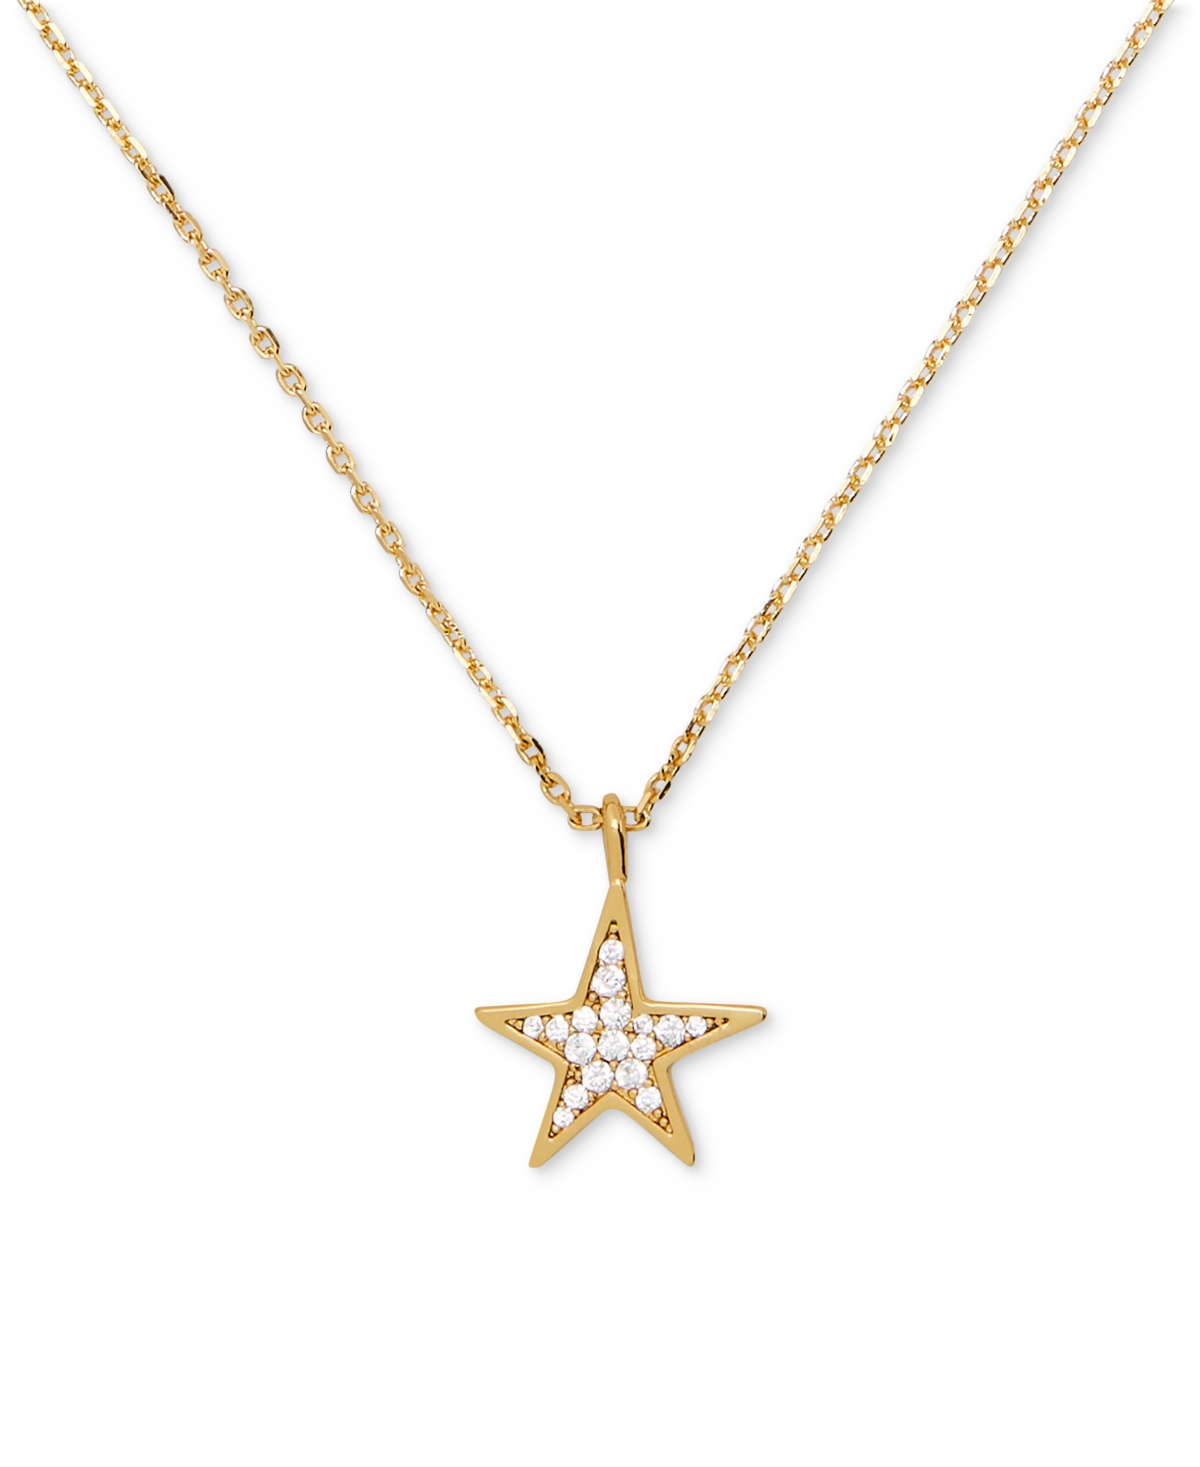 Kate Spade Silver-tone Pave Star Pendant Necklace, 16" + 3" Extender In Clear,gold.